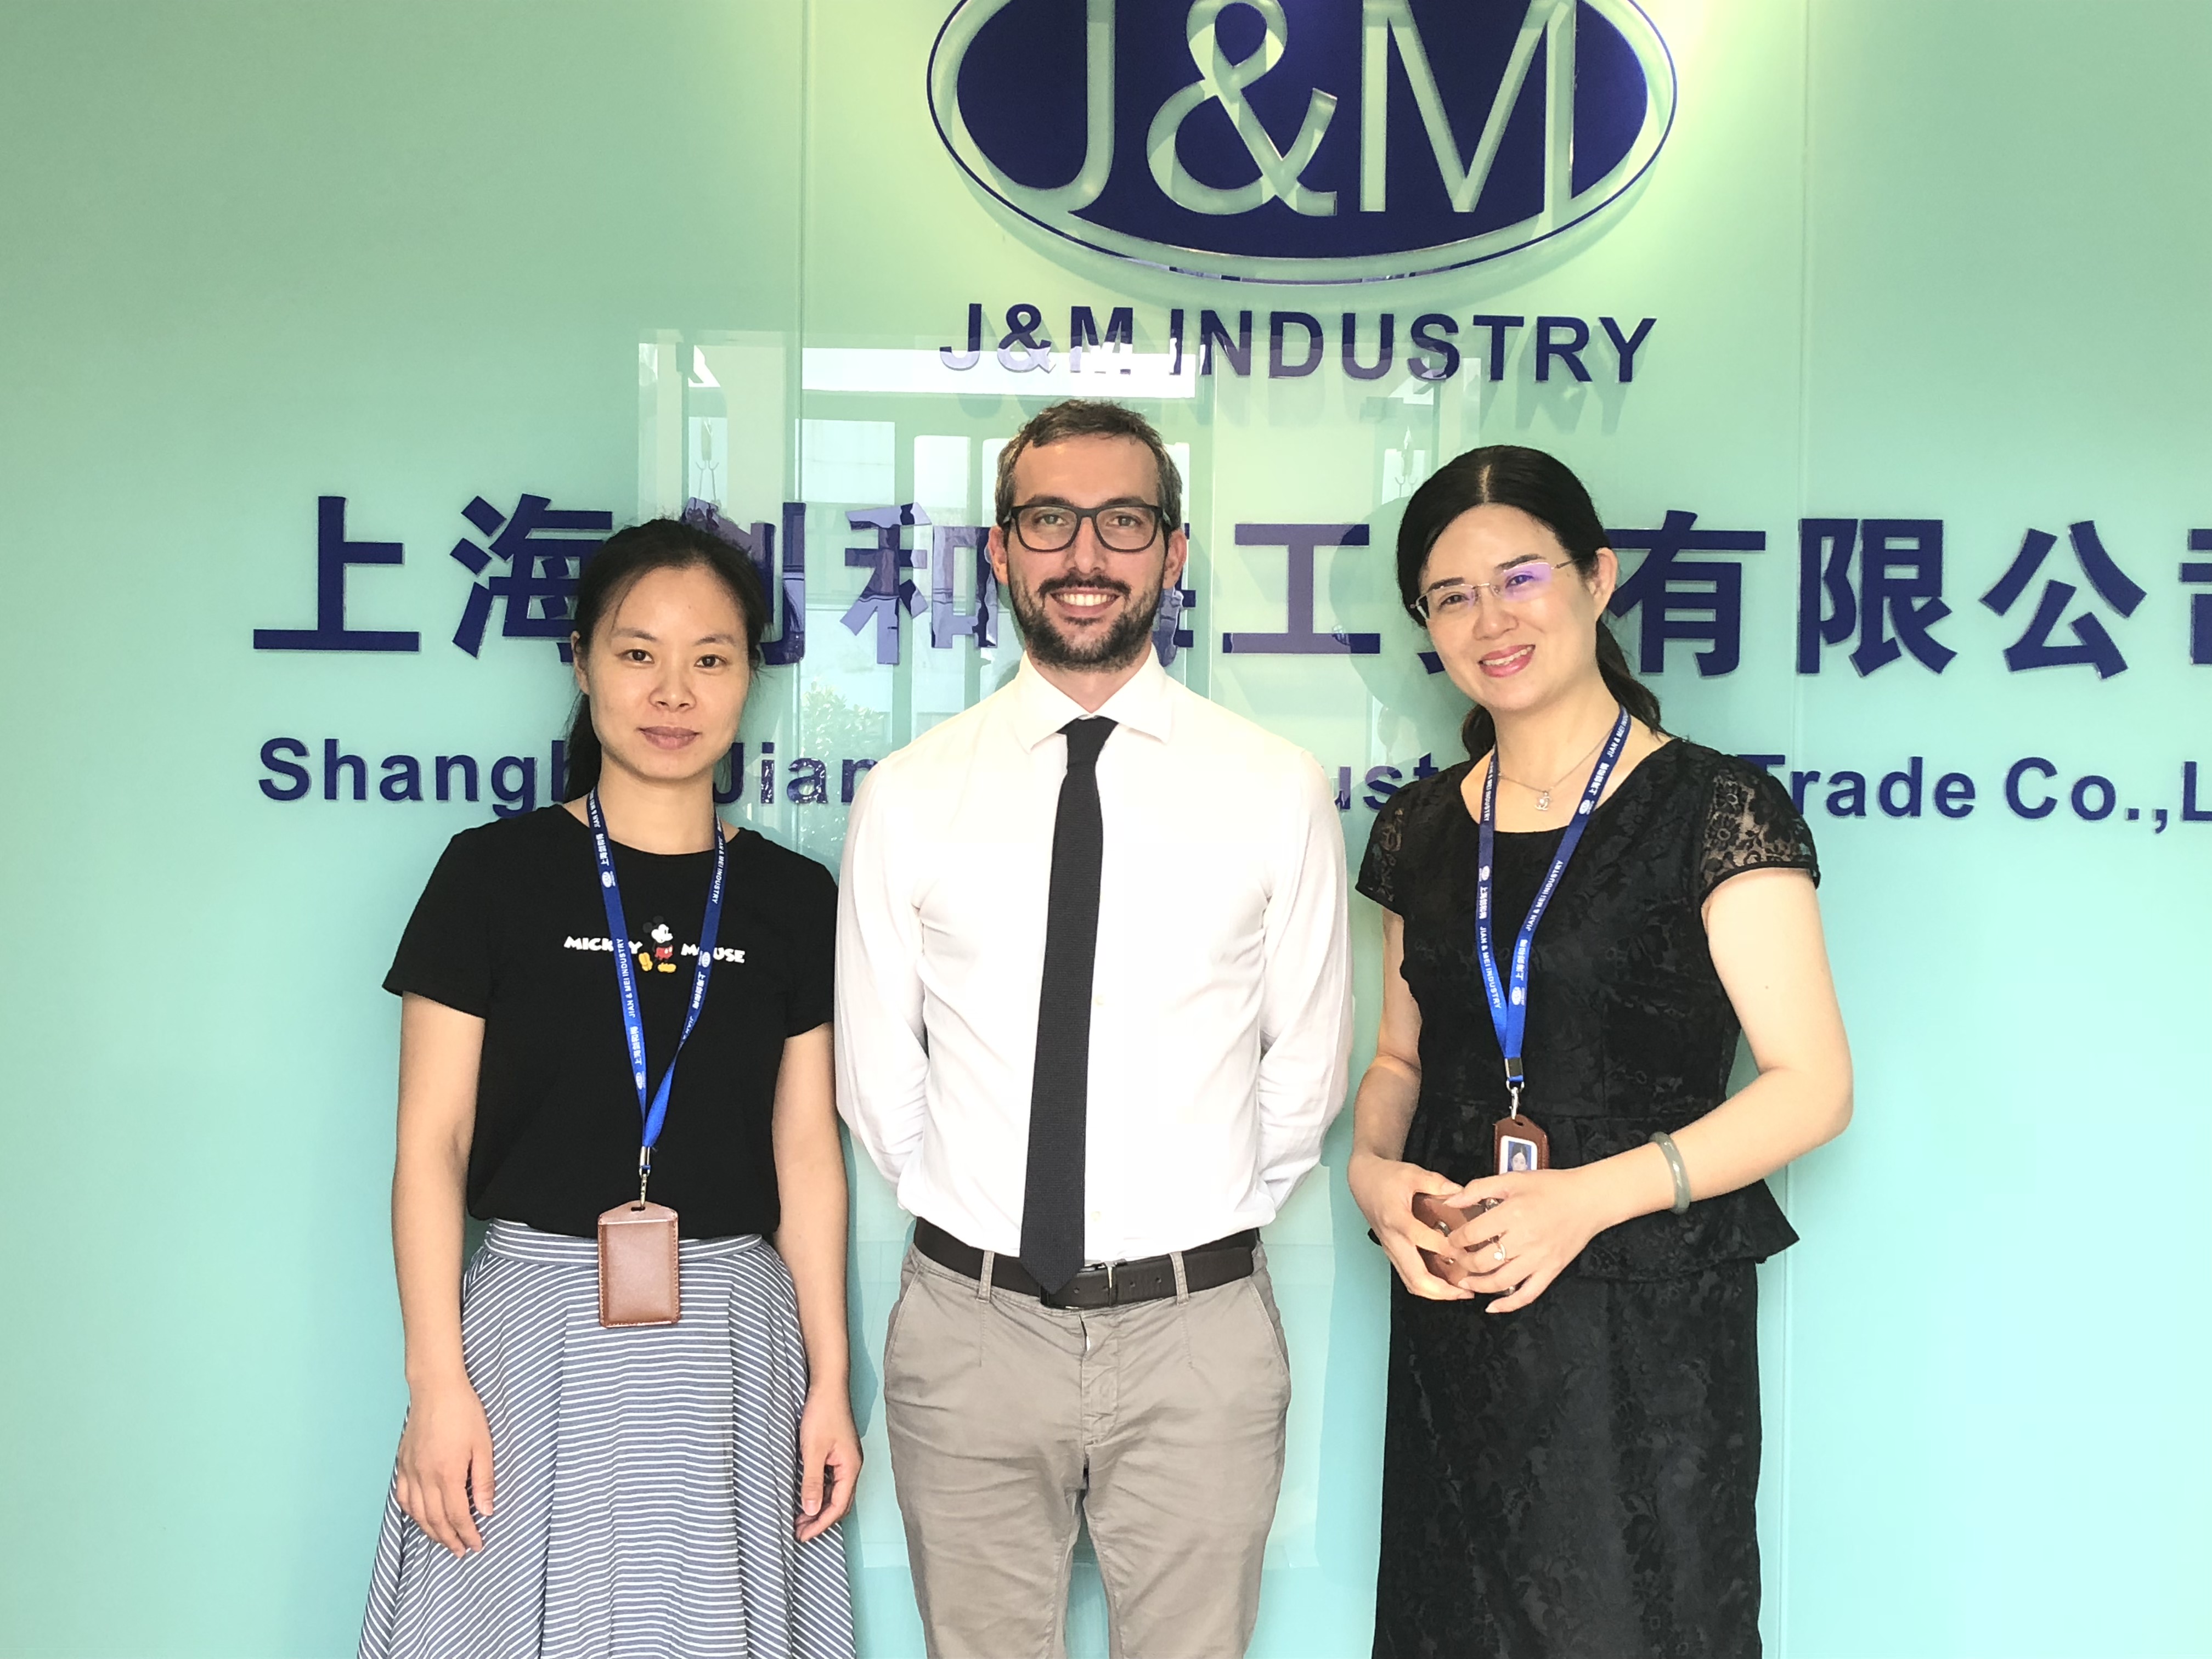 Sep. 4th 2018, One of our customers from Italy visited us